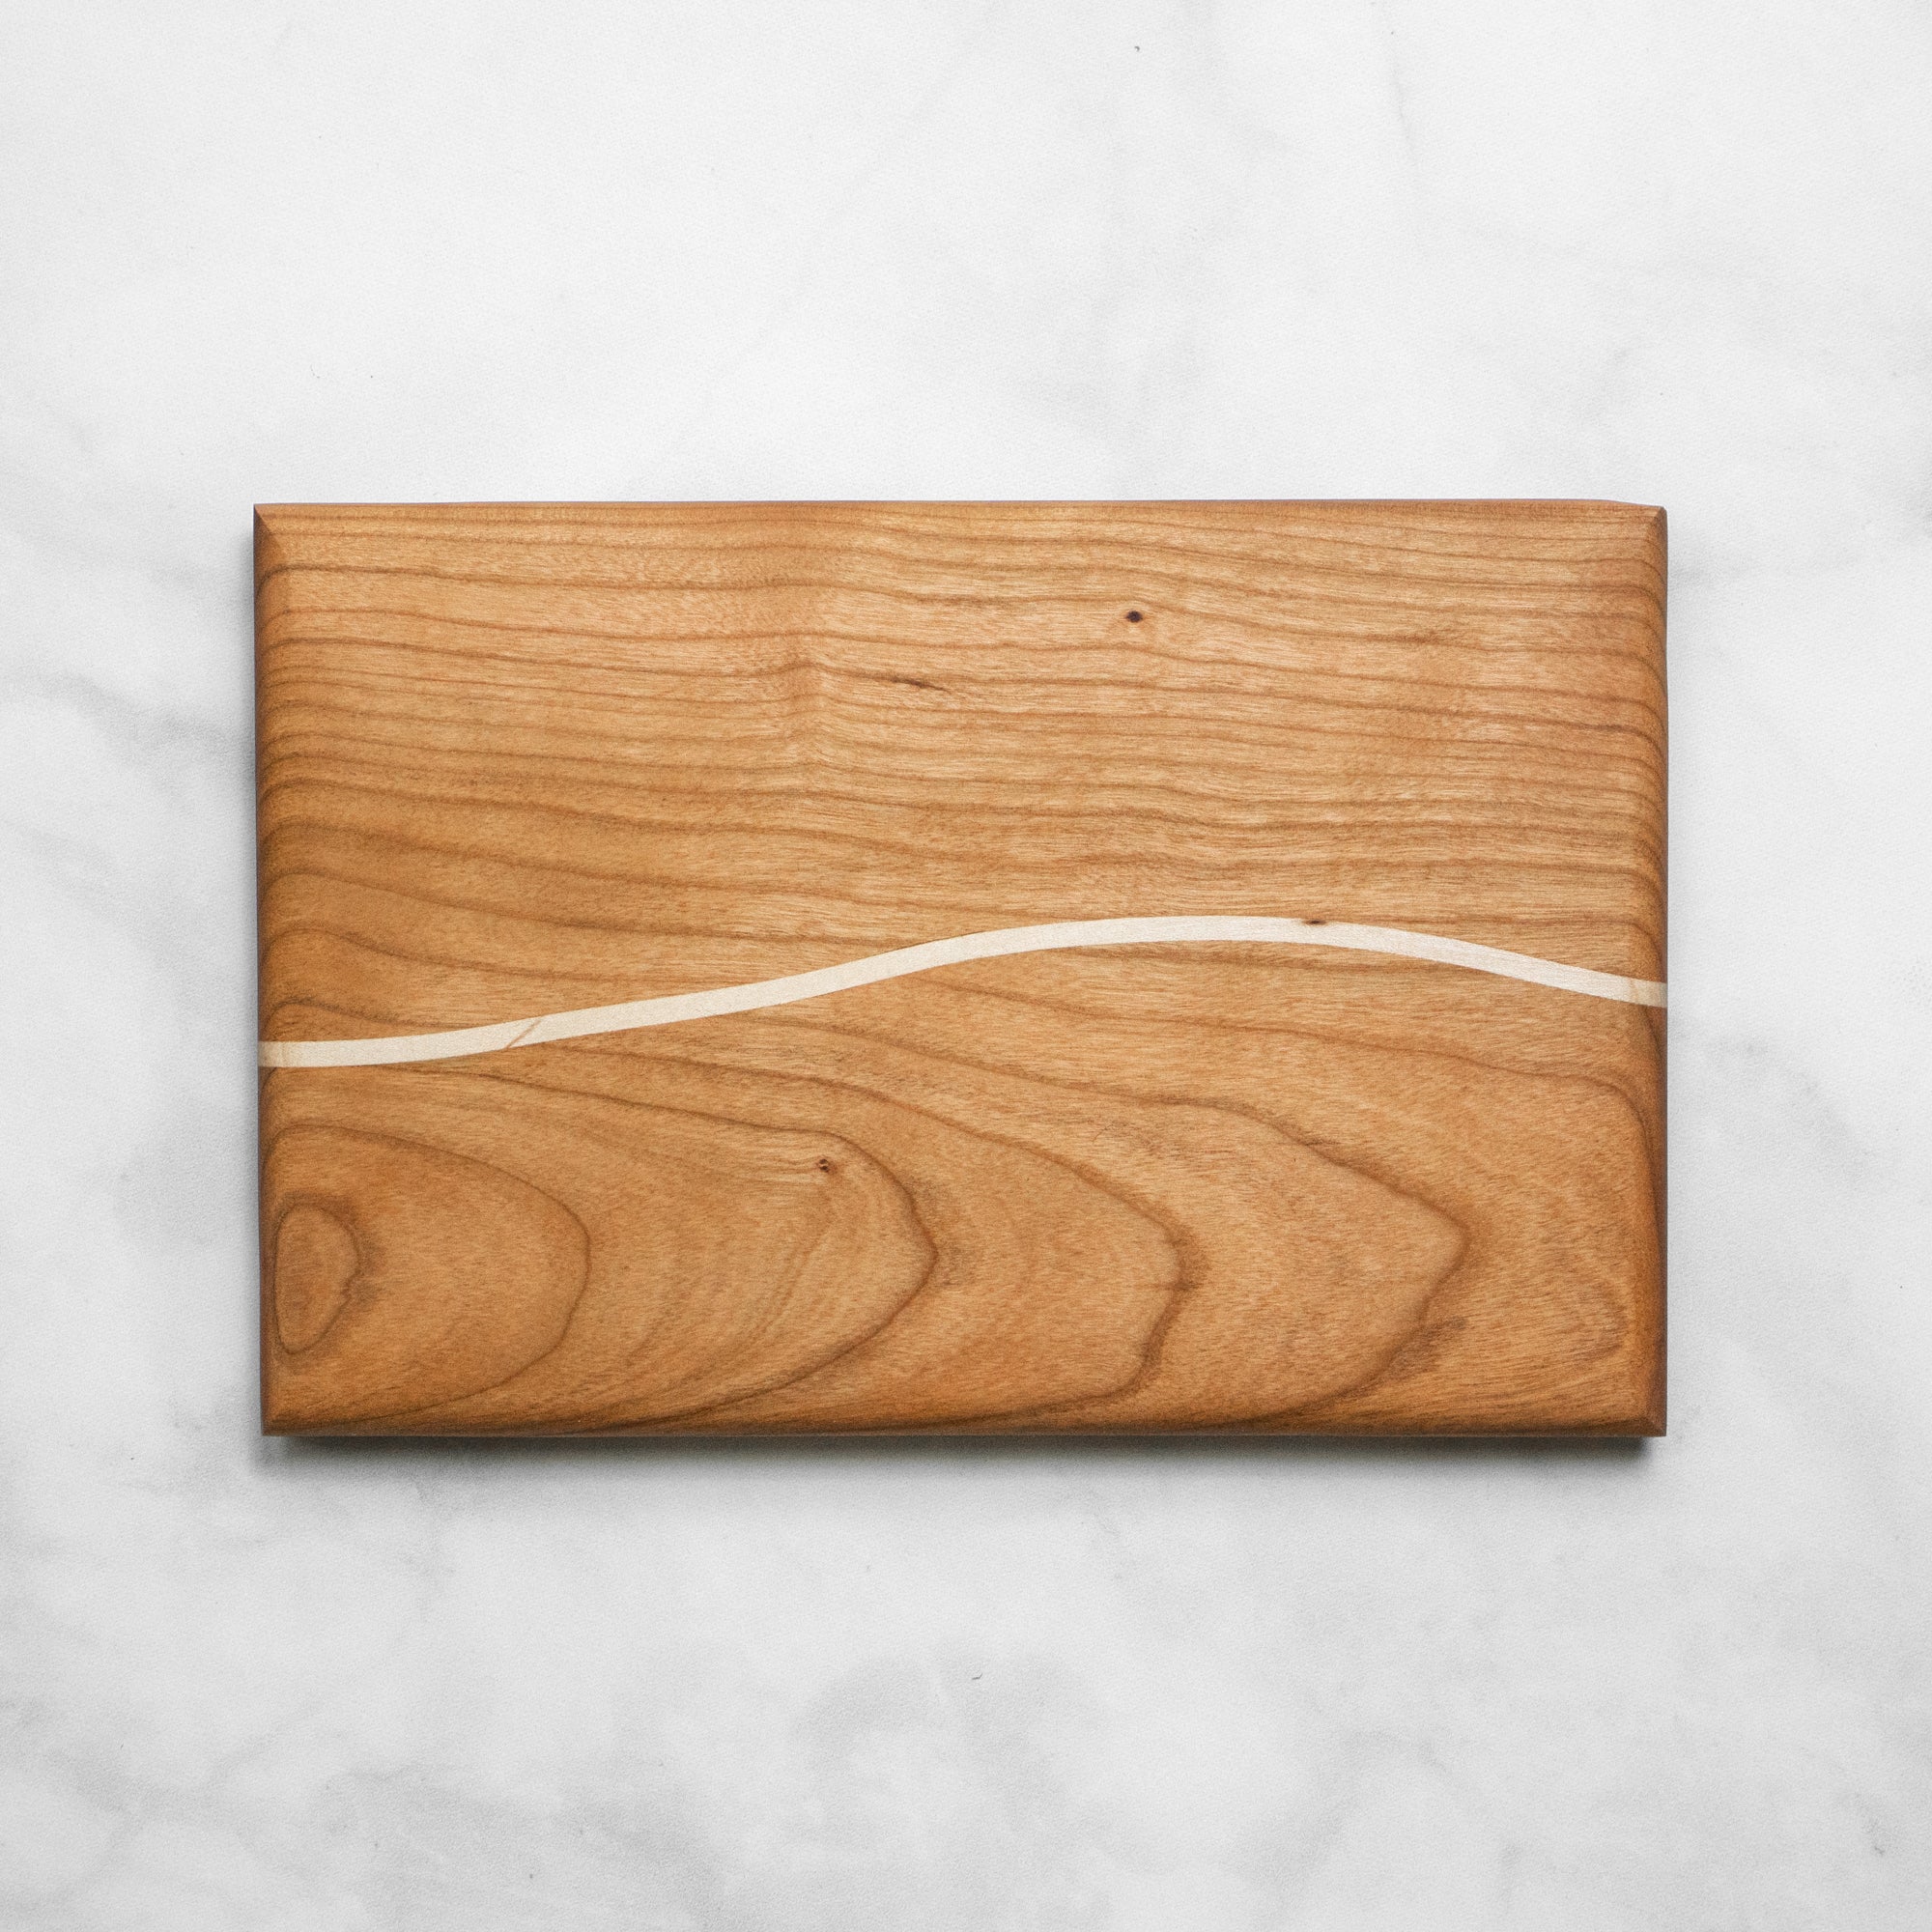 How to Add a Leather Handle to a Cutting Board